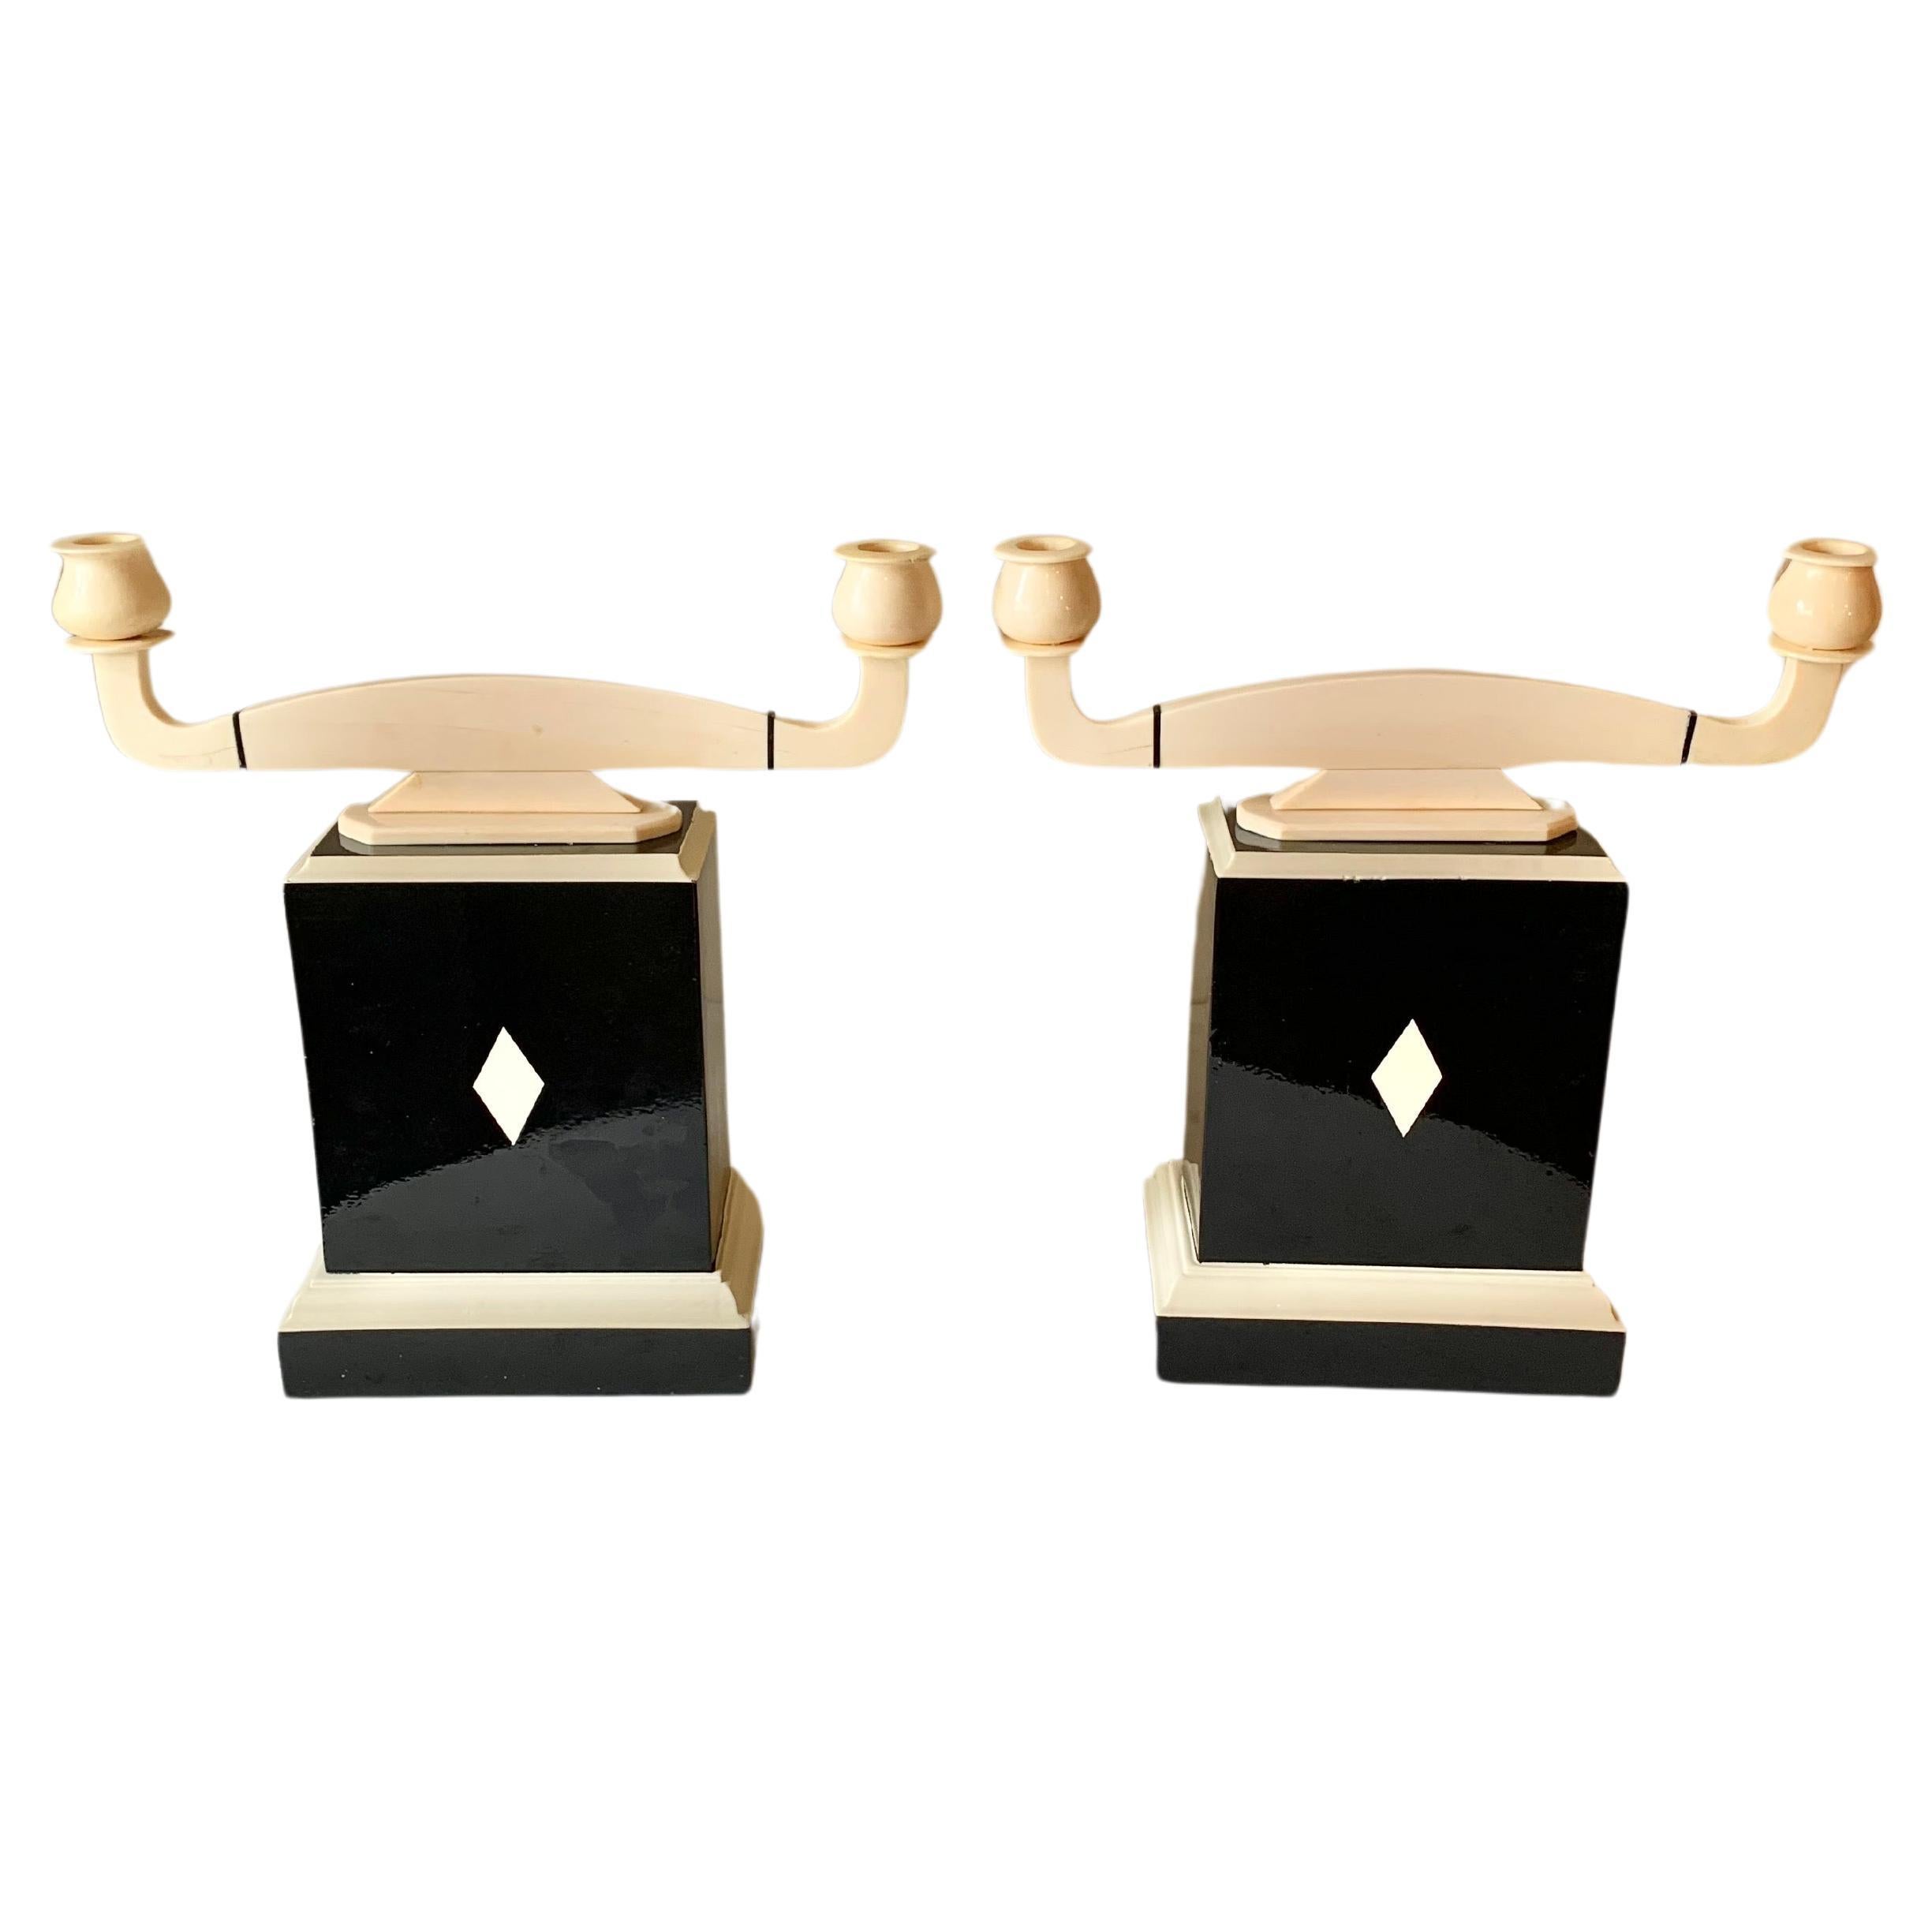 Found in England, this striking pair of Art Deco Style Candleholders were handcrafted from wood and resin by artisans in the 20th Century. The base of each candlestick is created from wood that has been lacquer painted in a black and ivory and